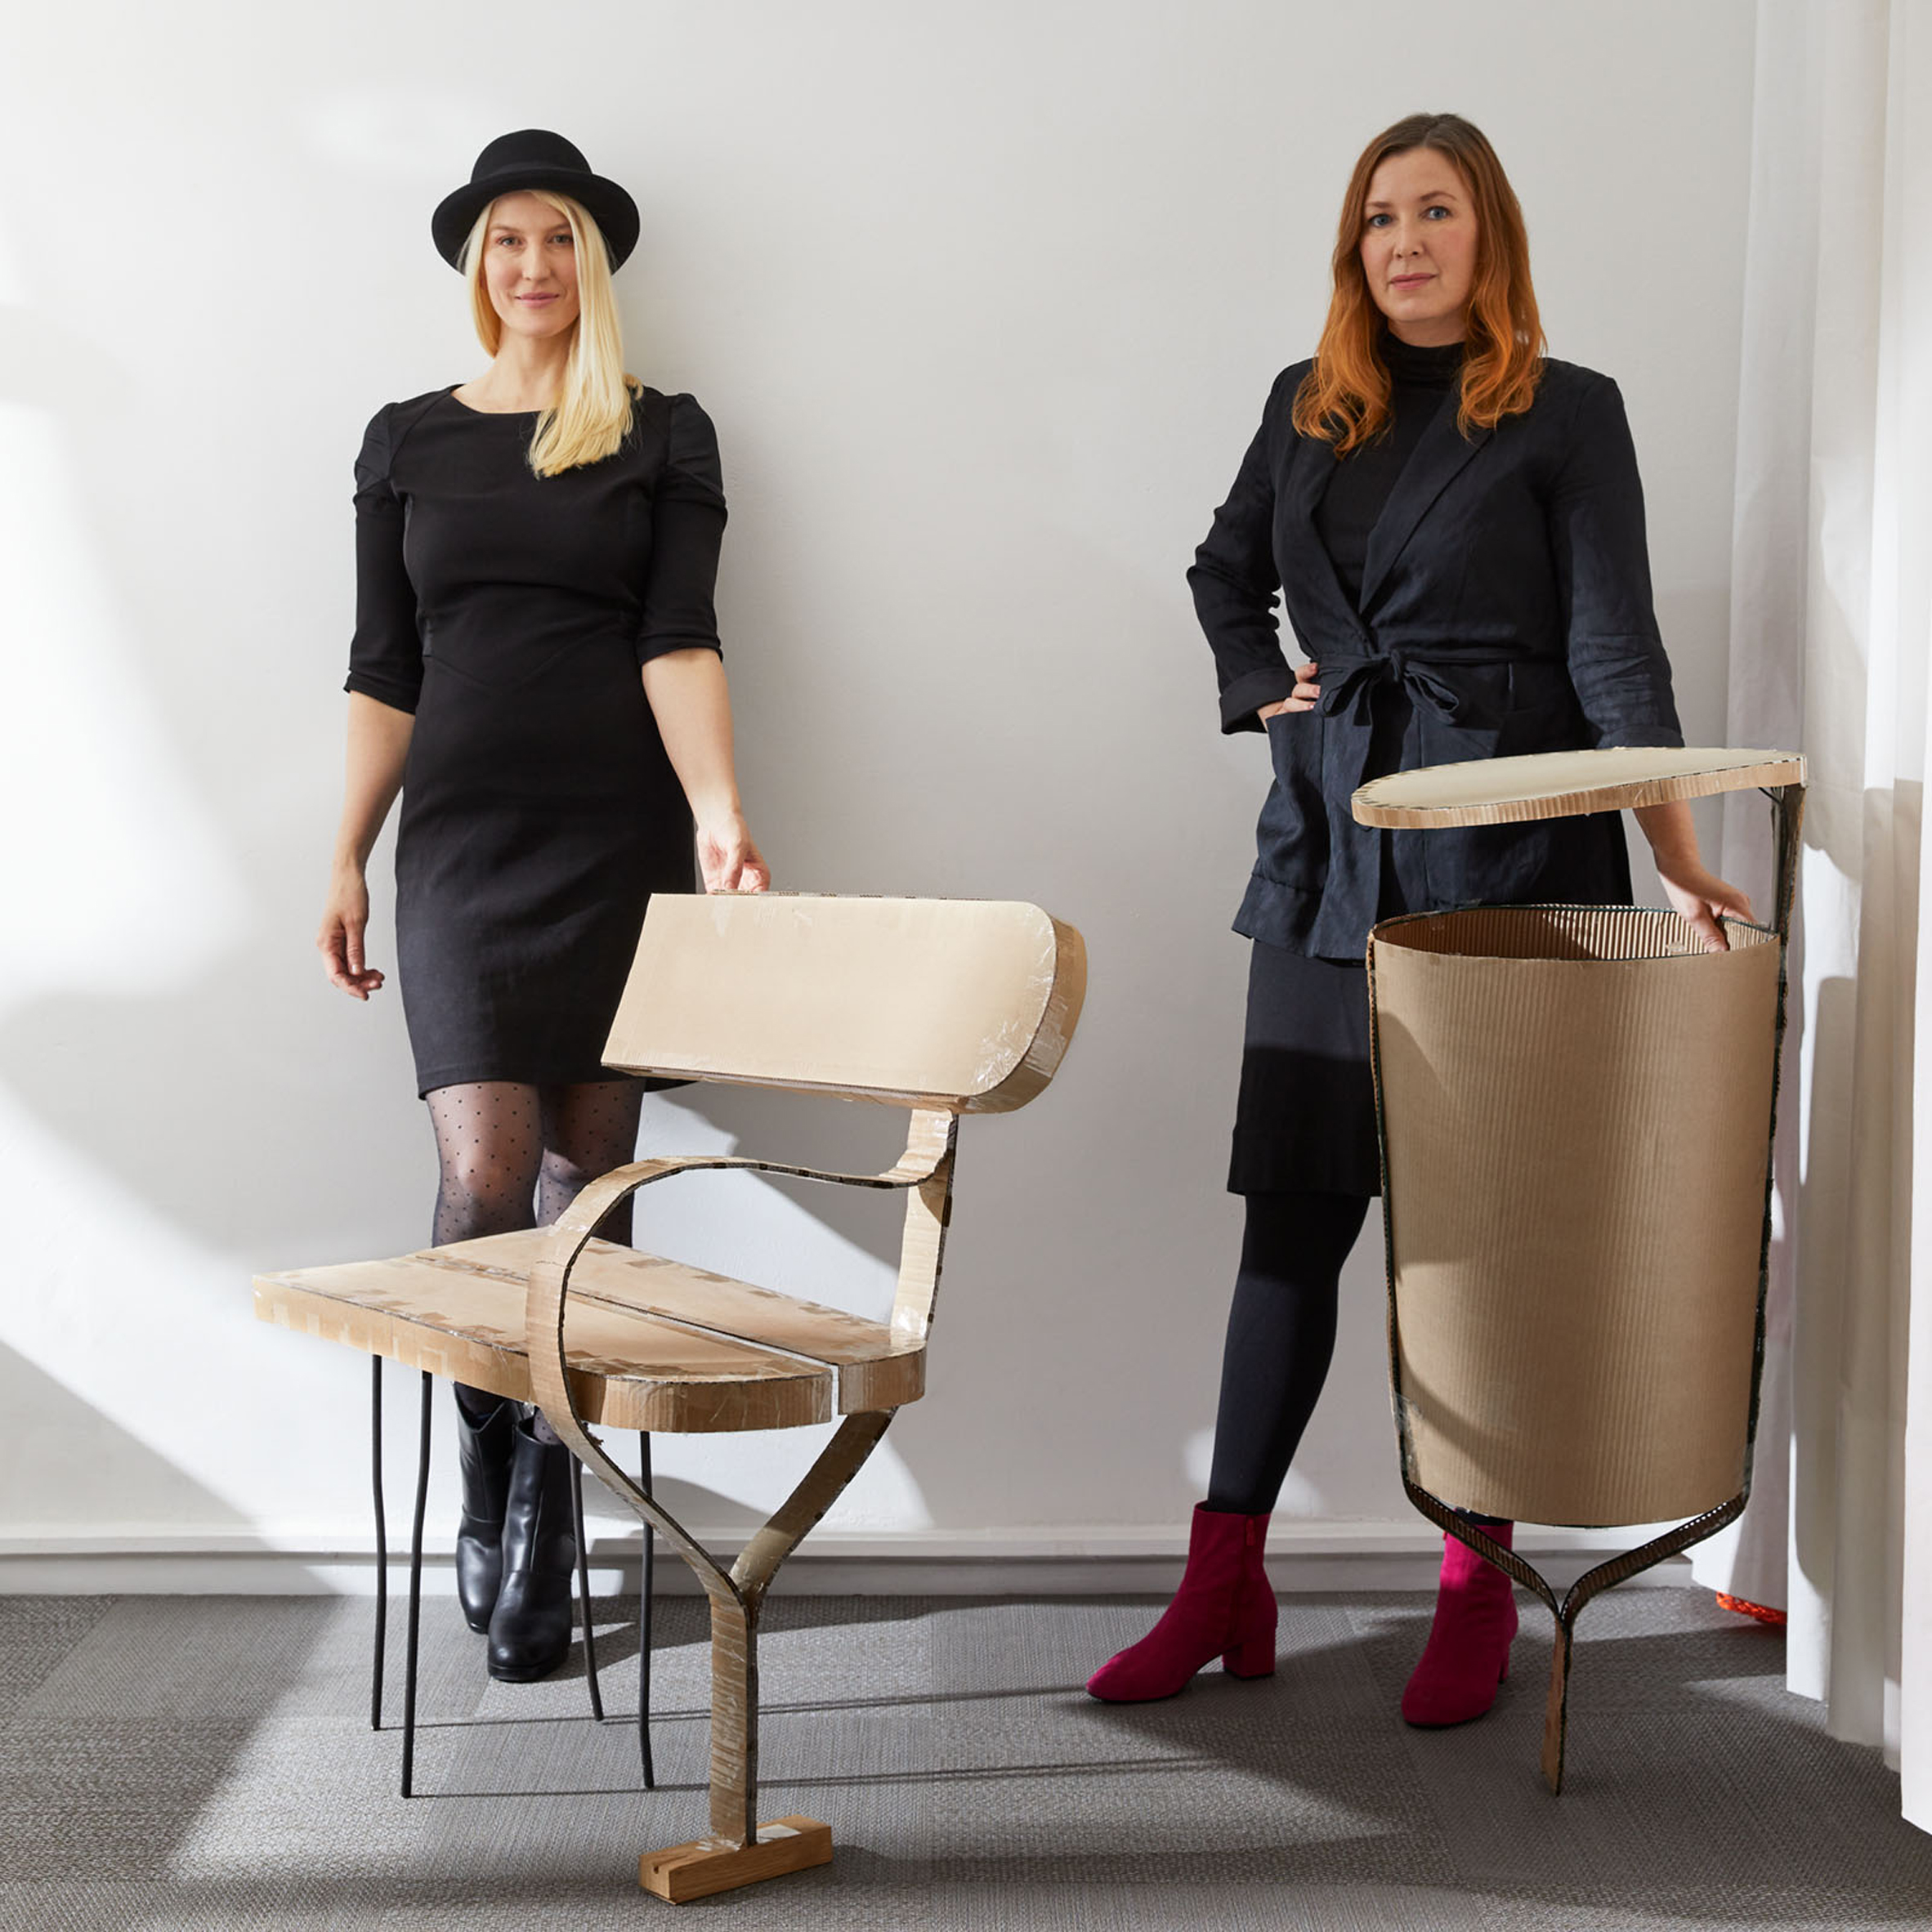 Sofia Lagerkvist and Anna Lindgren, co-founders of Swedish design studio Front, with prototypes of their Folk collection for Vestre